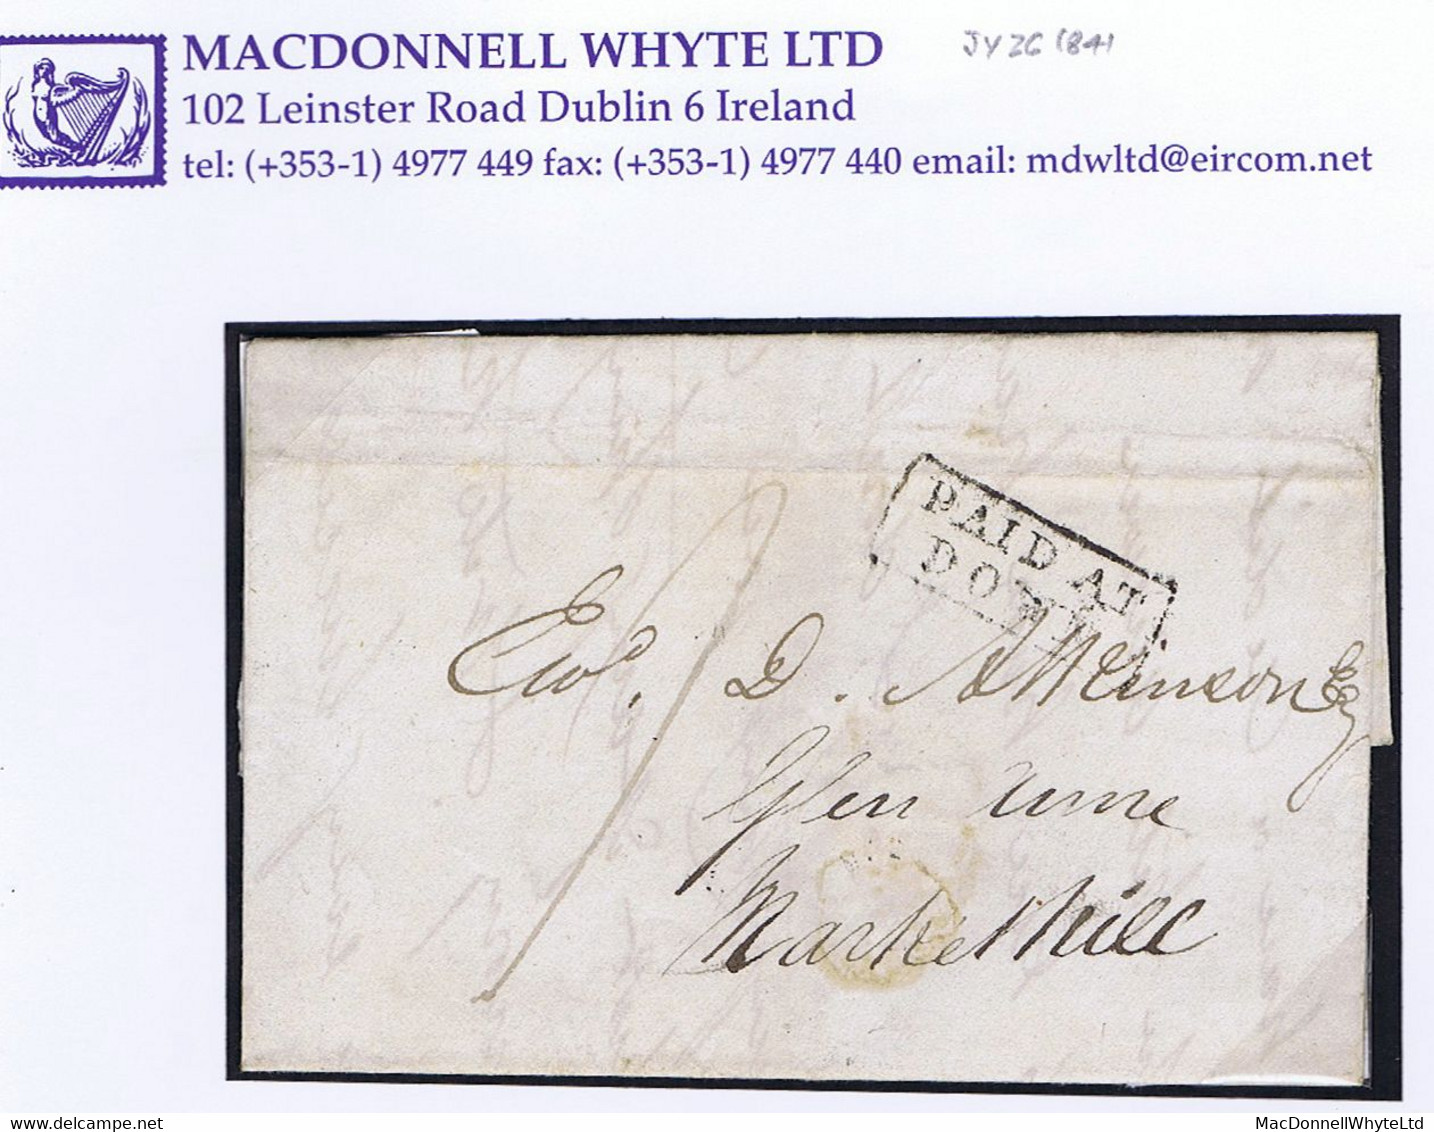 Ireland Down Uniform Penny Post 1841 Letter To Markethill Paid "1" Boxed PAID AT/DOWN, Cds DOWN JY 26 1841 - Prephilately